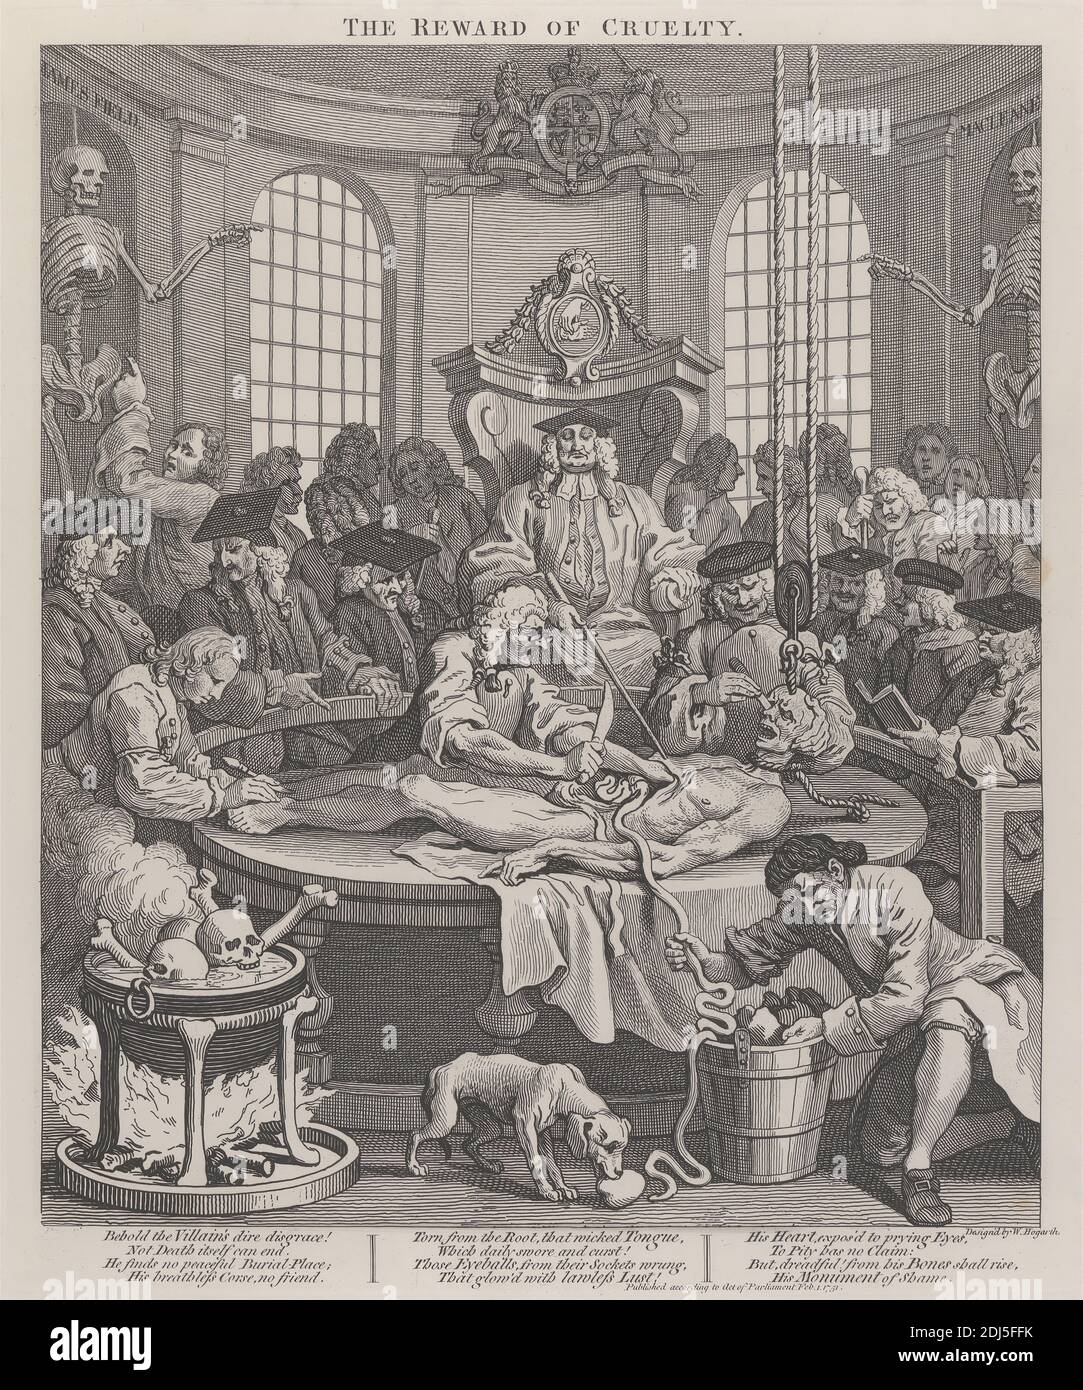 The Fourth Stage of Cruelty: The Reward of Cruelty, Print made by William Hogarth, 1697–1764, British, 1751, printed 1790, Line engraving on thick, white, smooth wove paper, Sheet: 24 7/8 x 19 1/4 inches (63.2 x 48.9 cm), Plate: 15 1/4 x 12 3/4 inches (38.7 x 32.4 cm), and Sheet: 14 x 11 3/4 inches (35.6 x 29.8 cm), anatomical study, anatomy, bones (material), cruelty, dog (animal), fire, genre subject, knife, lecture, medicine, men, mortar boards, rope, school, science, skeletons, skull, torture, water Stock Photo